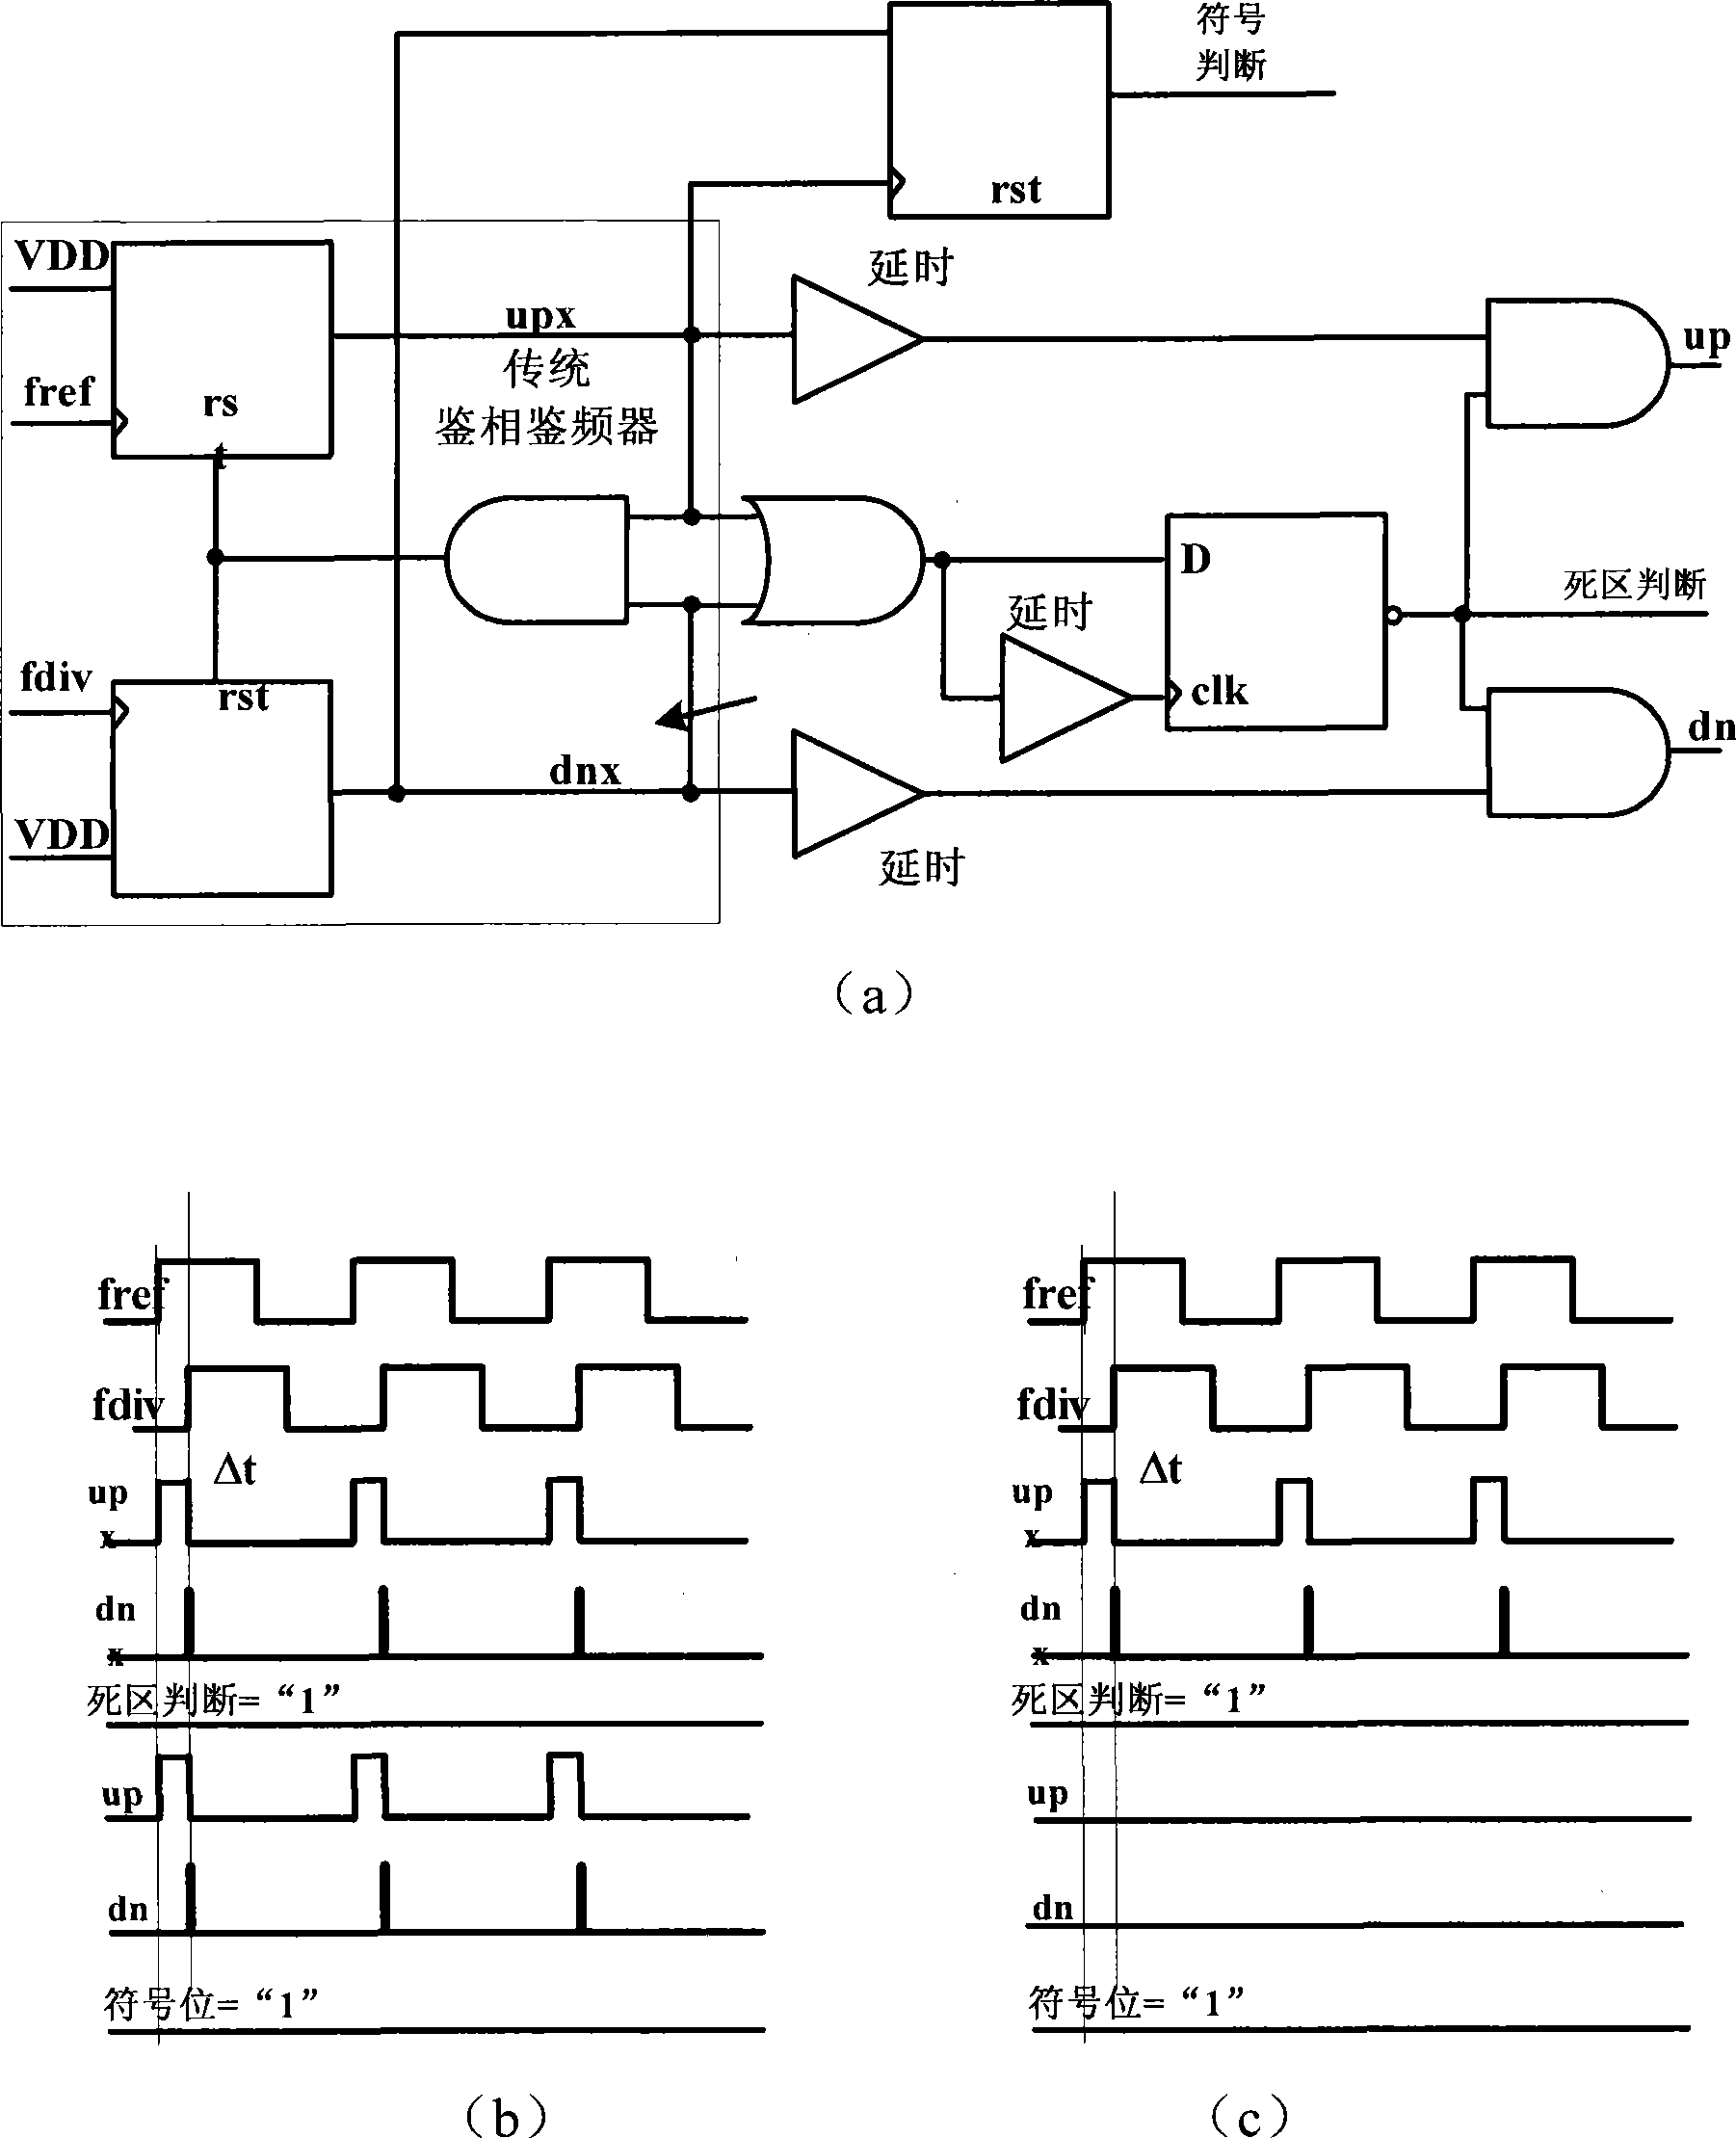 Phase-locked loop frequency synthesizer structure for improving in-band phase noise performance